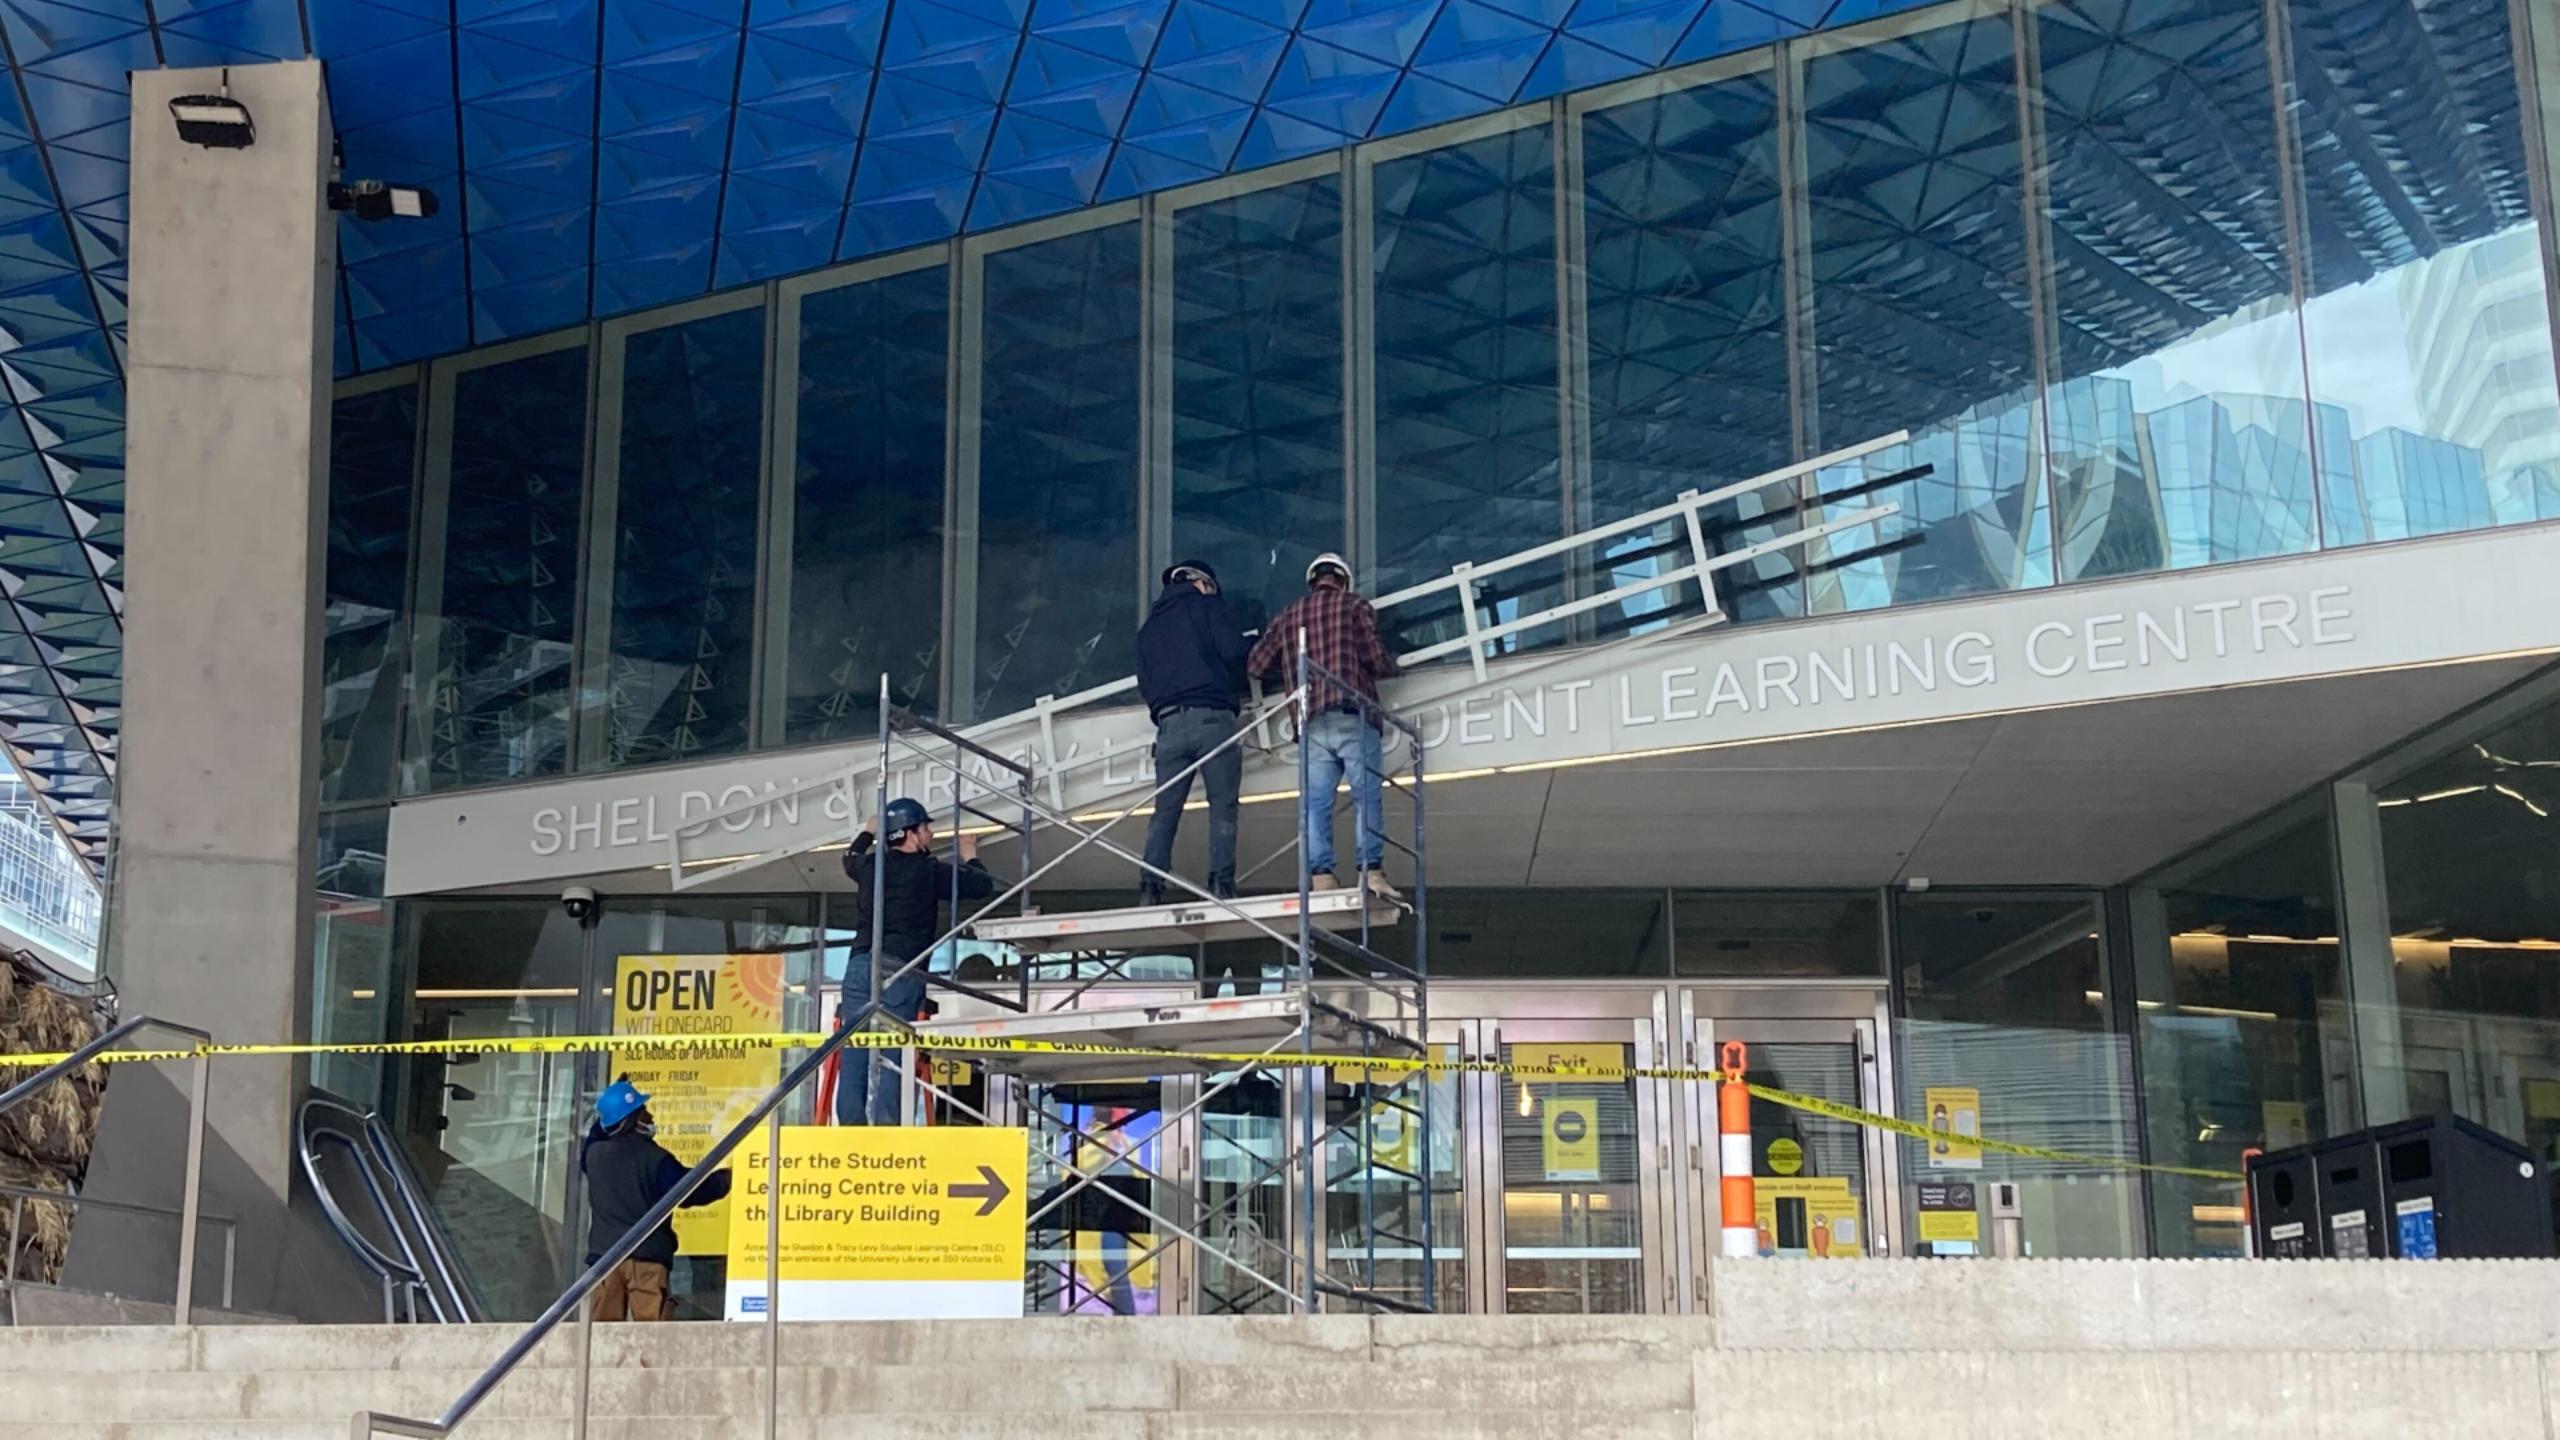 Four men in front of the SLC removing "Ryerson" from signage